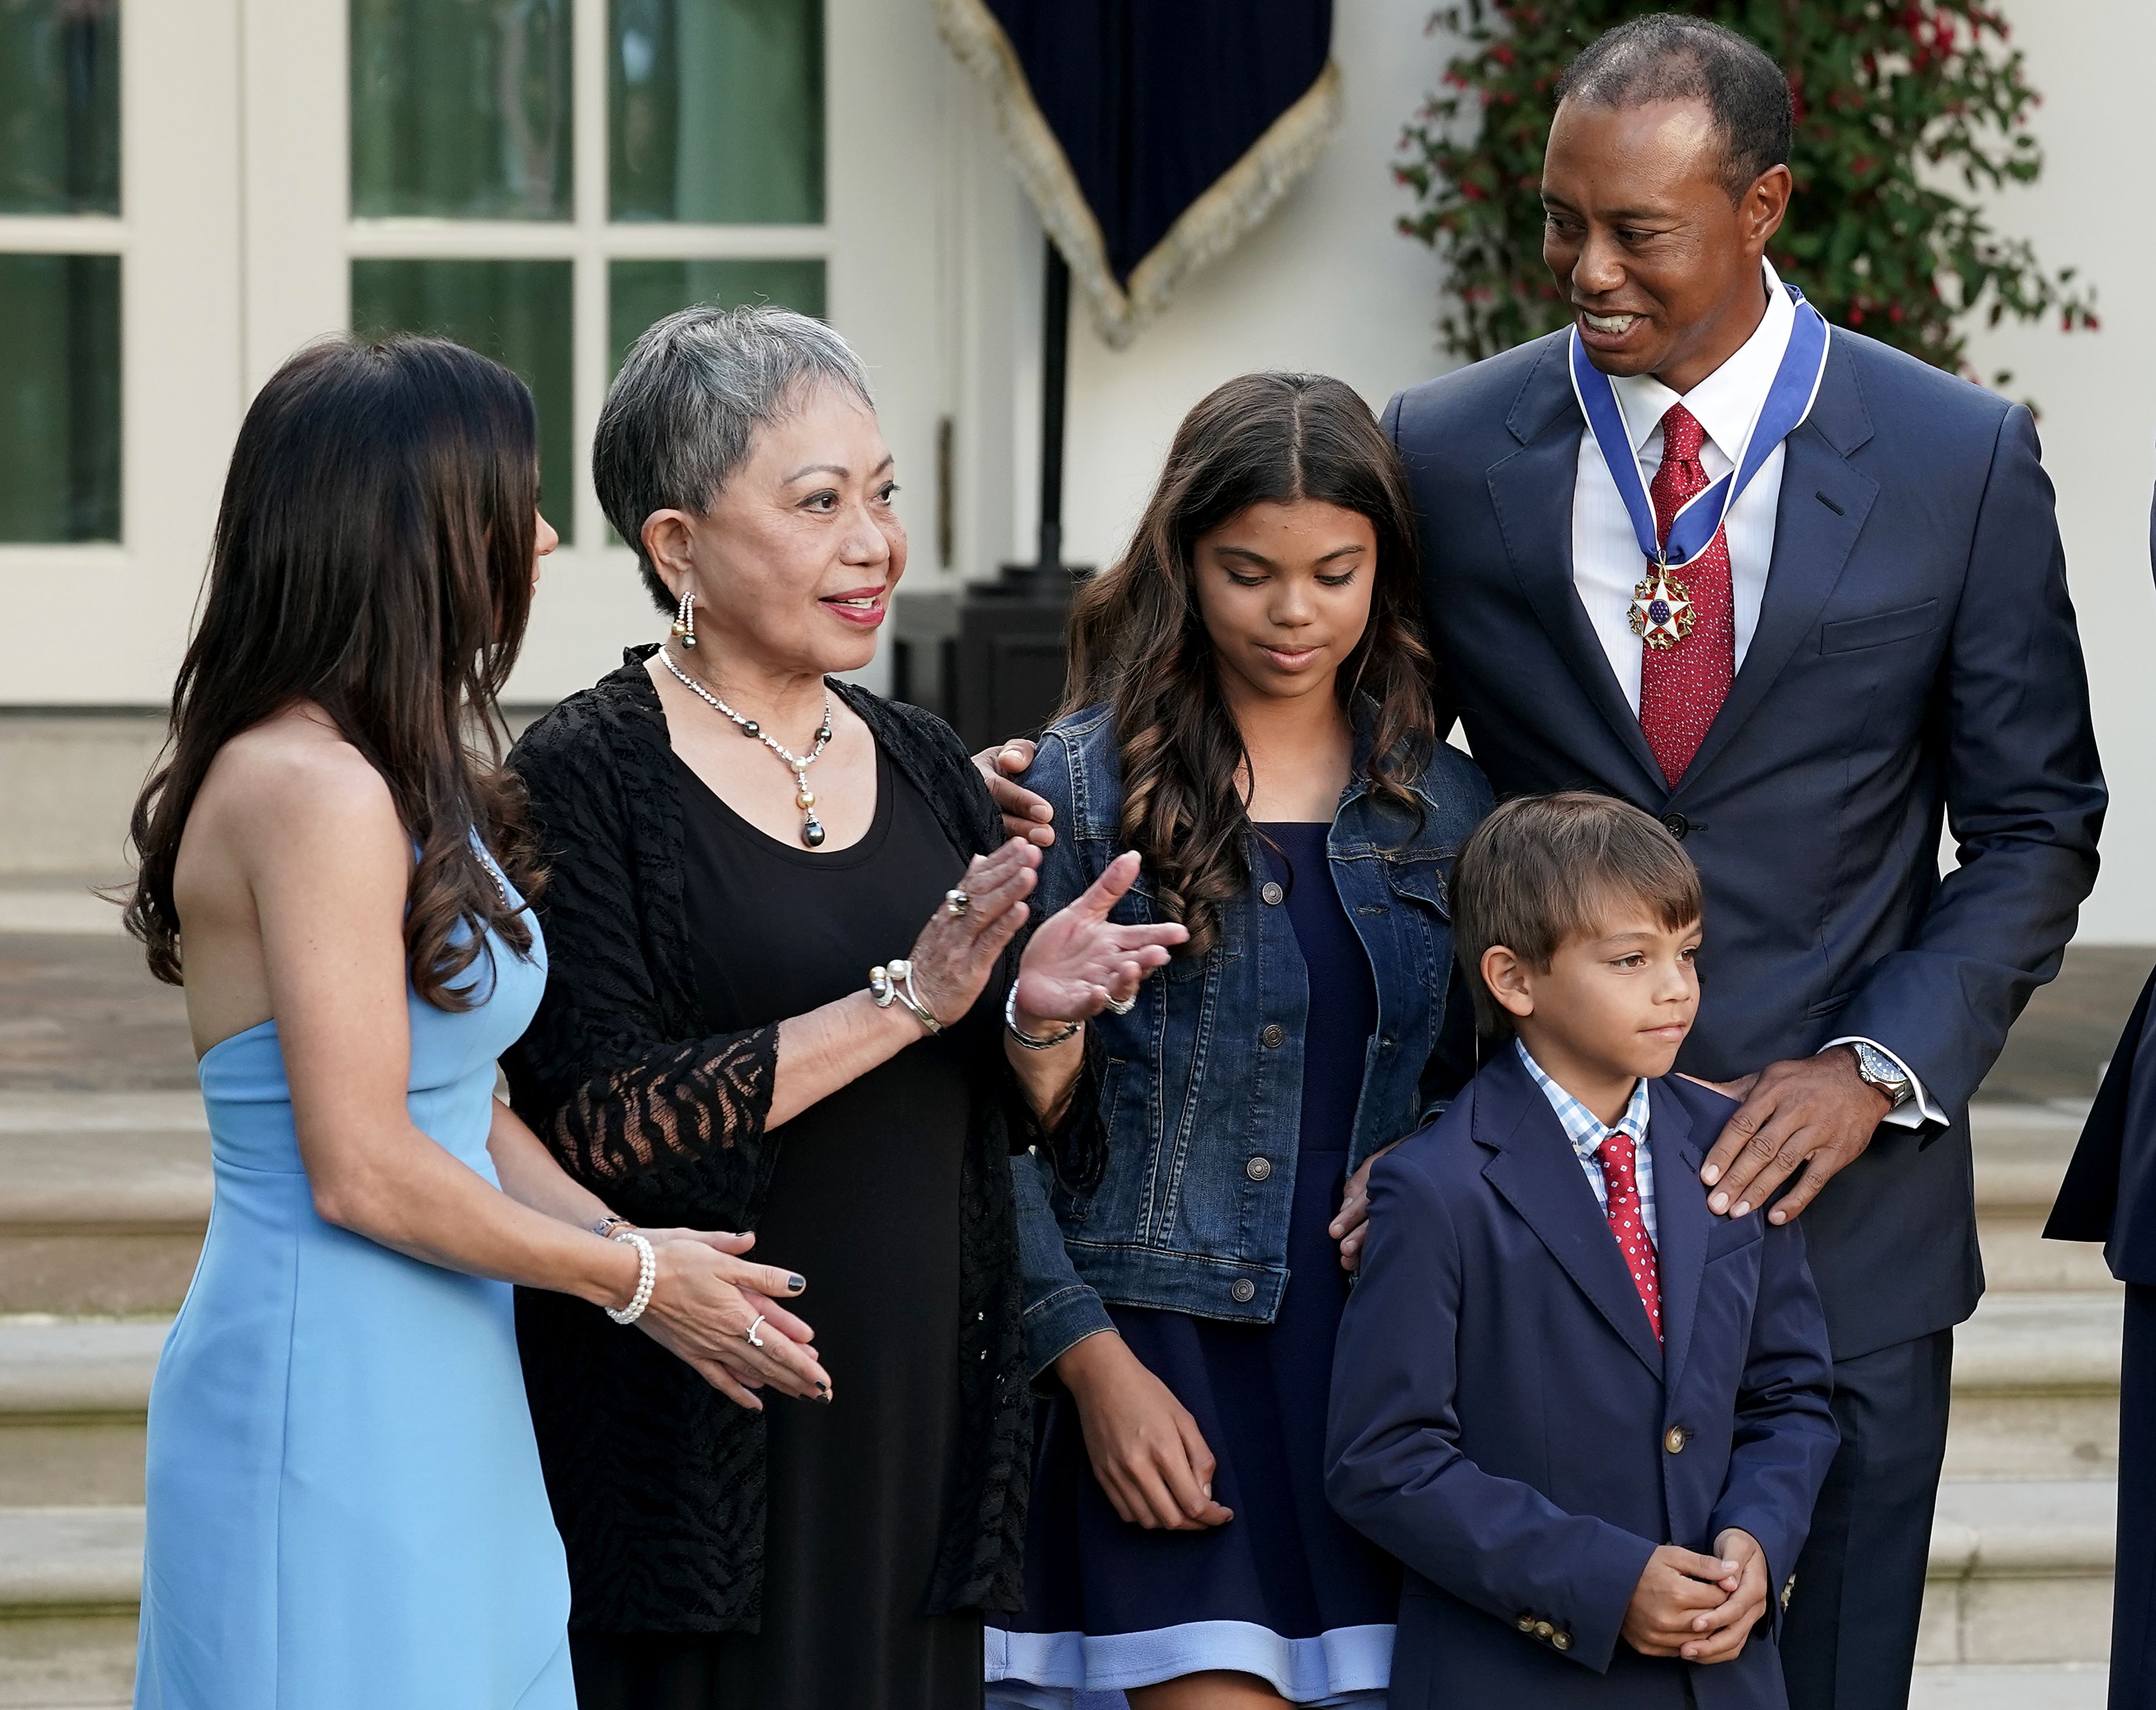 Tiger, Kultida, Sam Alexis, and Charlie Axel Woods alongside Erica Herman during Tiger's Medal of Freedom ceremony in the Rose Garden at the White House in Washington, Dc, on May 6, 2019. | Source: Getty Images